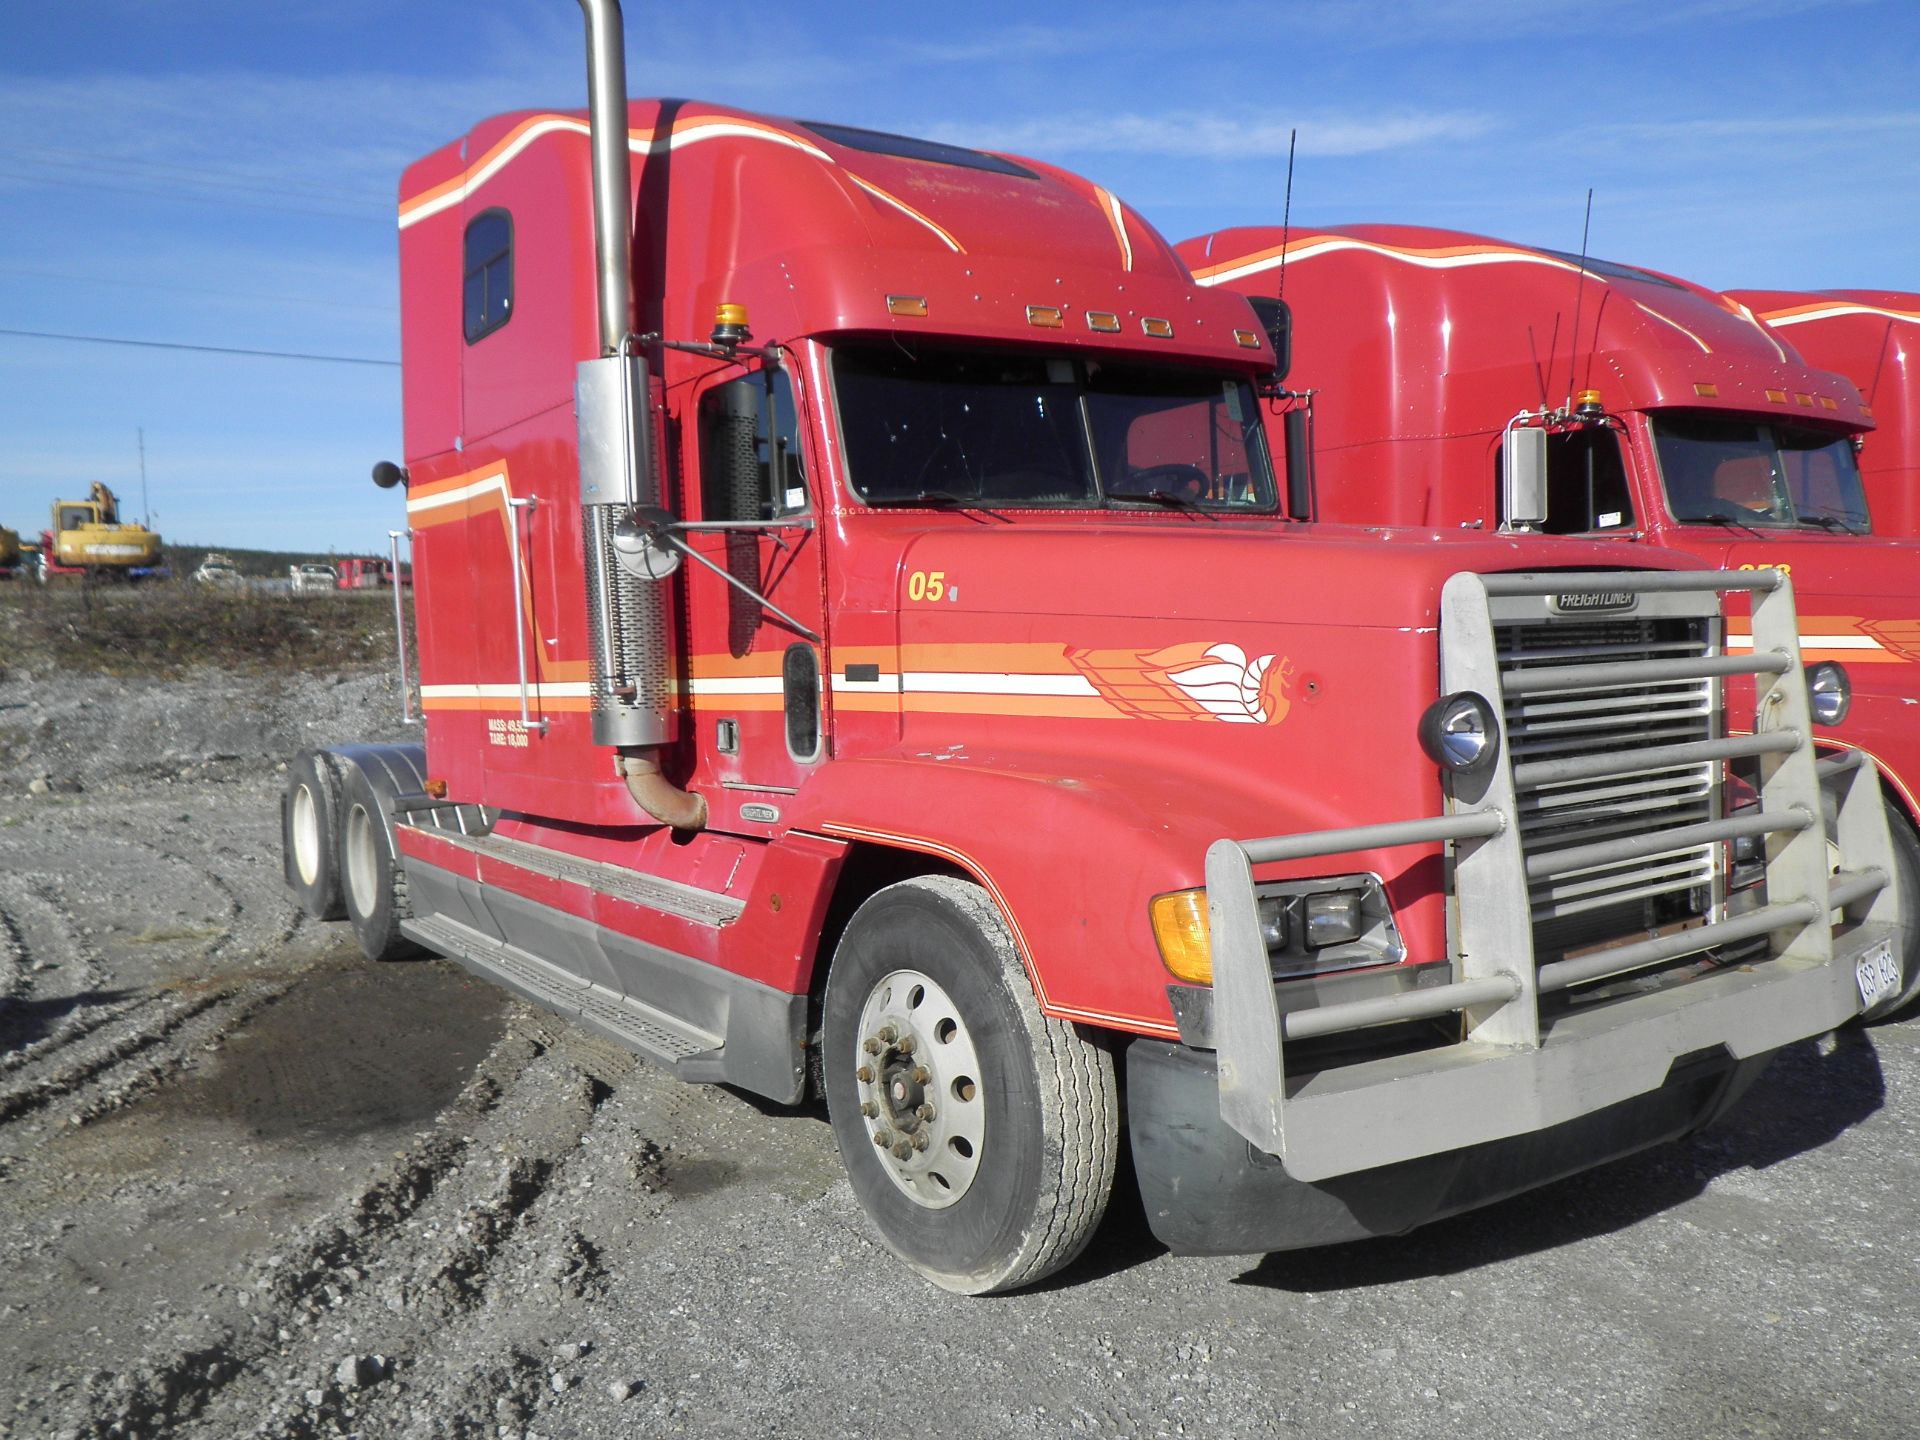 1998 FREIGHTLINER MODEL FLD120 T/A TRUCK TRACTOR, S/N 2FUYDSZB9WP899327 W/ DD SERIES 60 ENGINE ( - Image 4 of 4